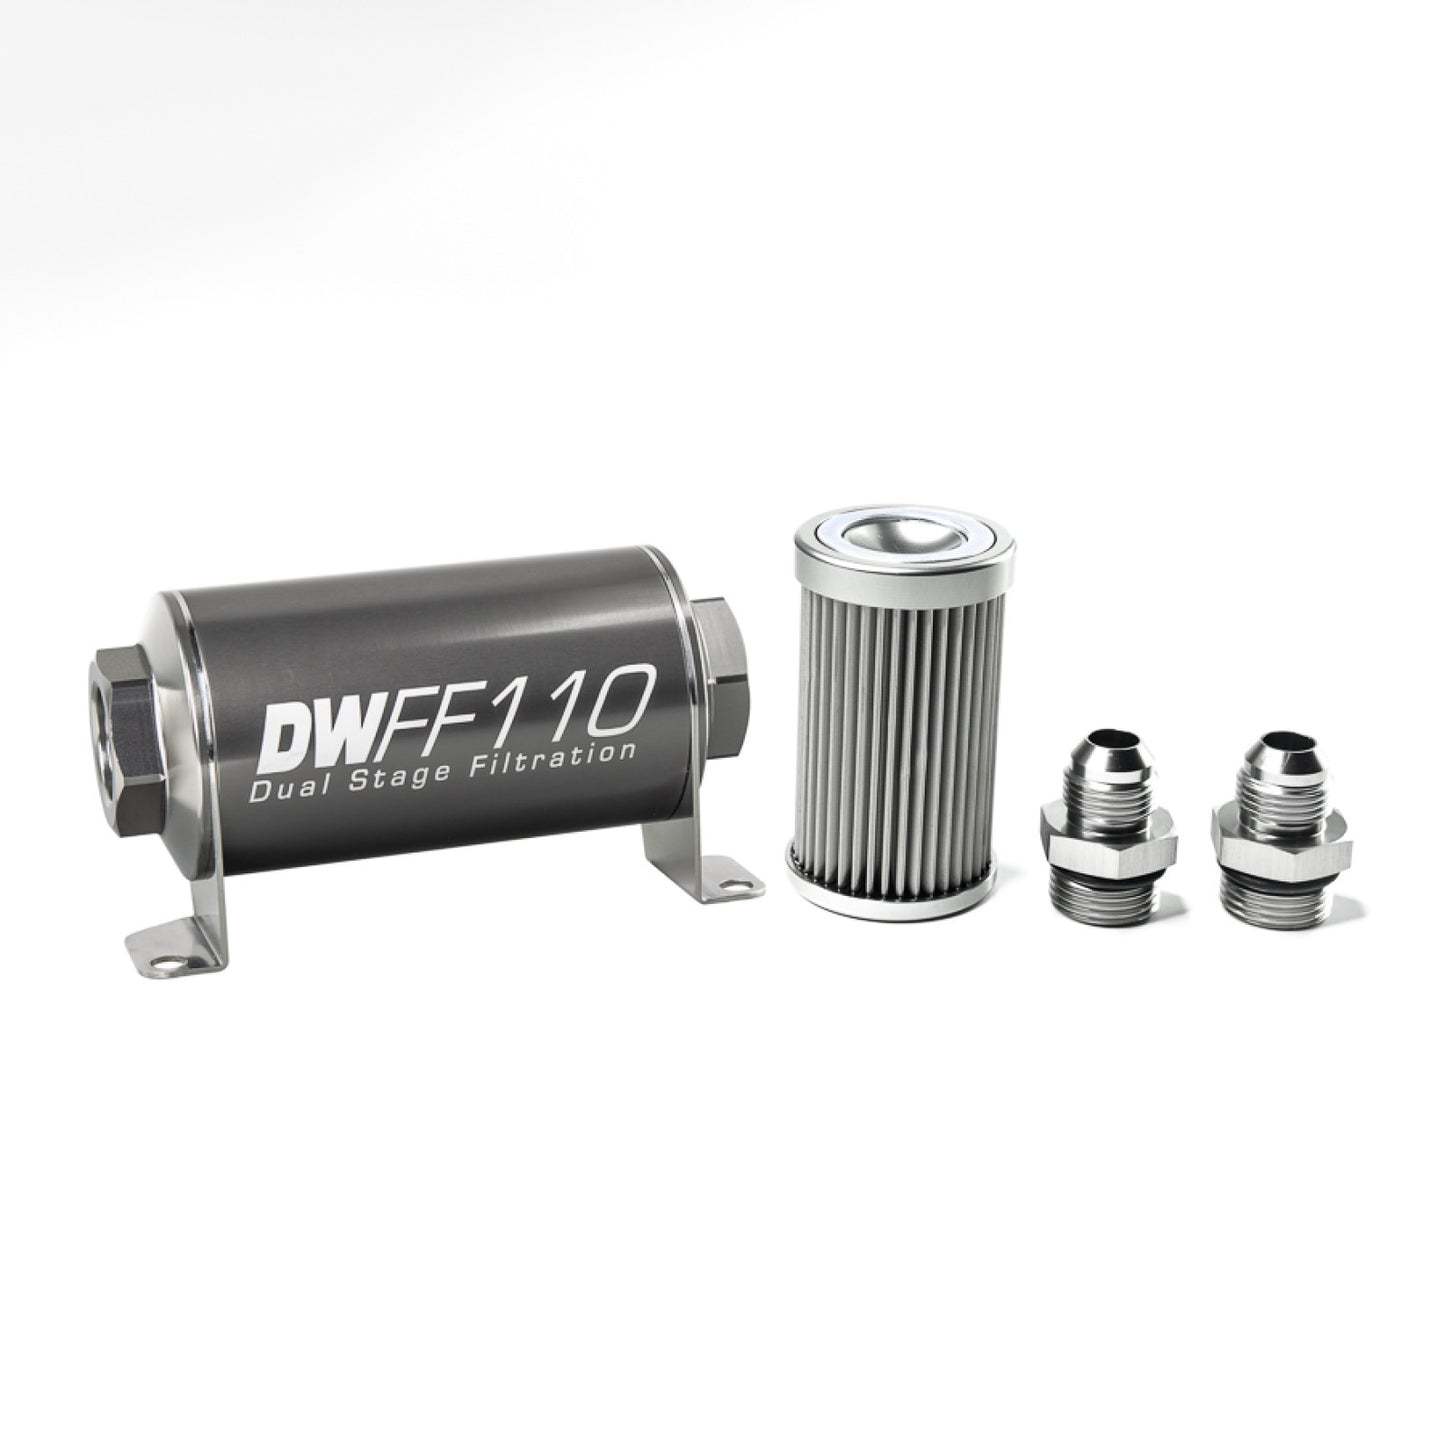 Deatschwerks In-line fuel filter element and housing kit, stainless steel 10 micron, -8AN, 110mm. Universal